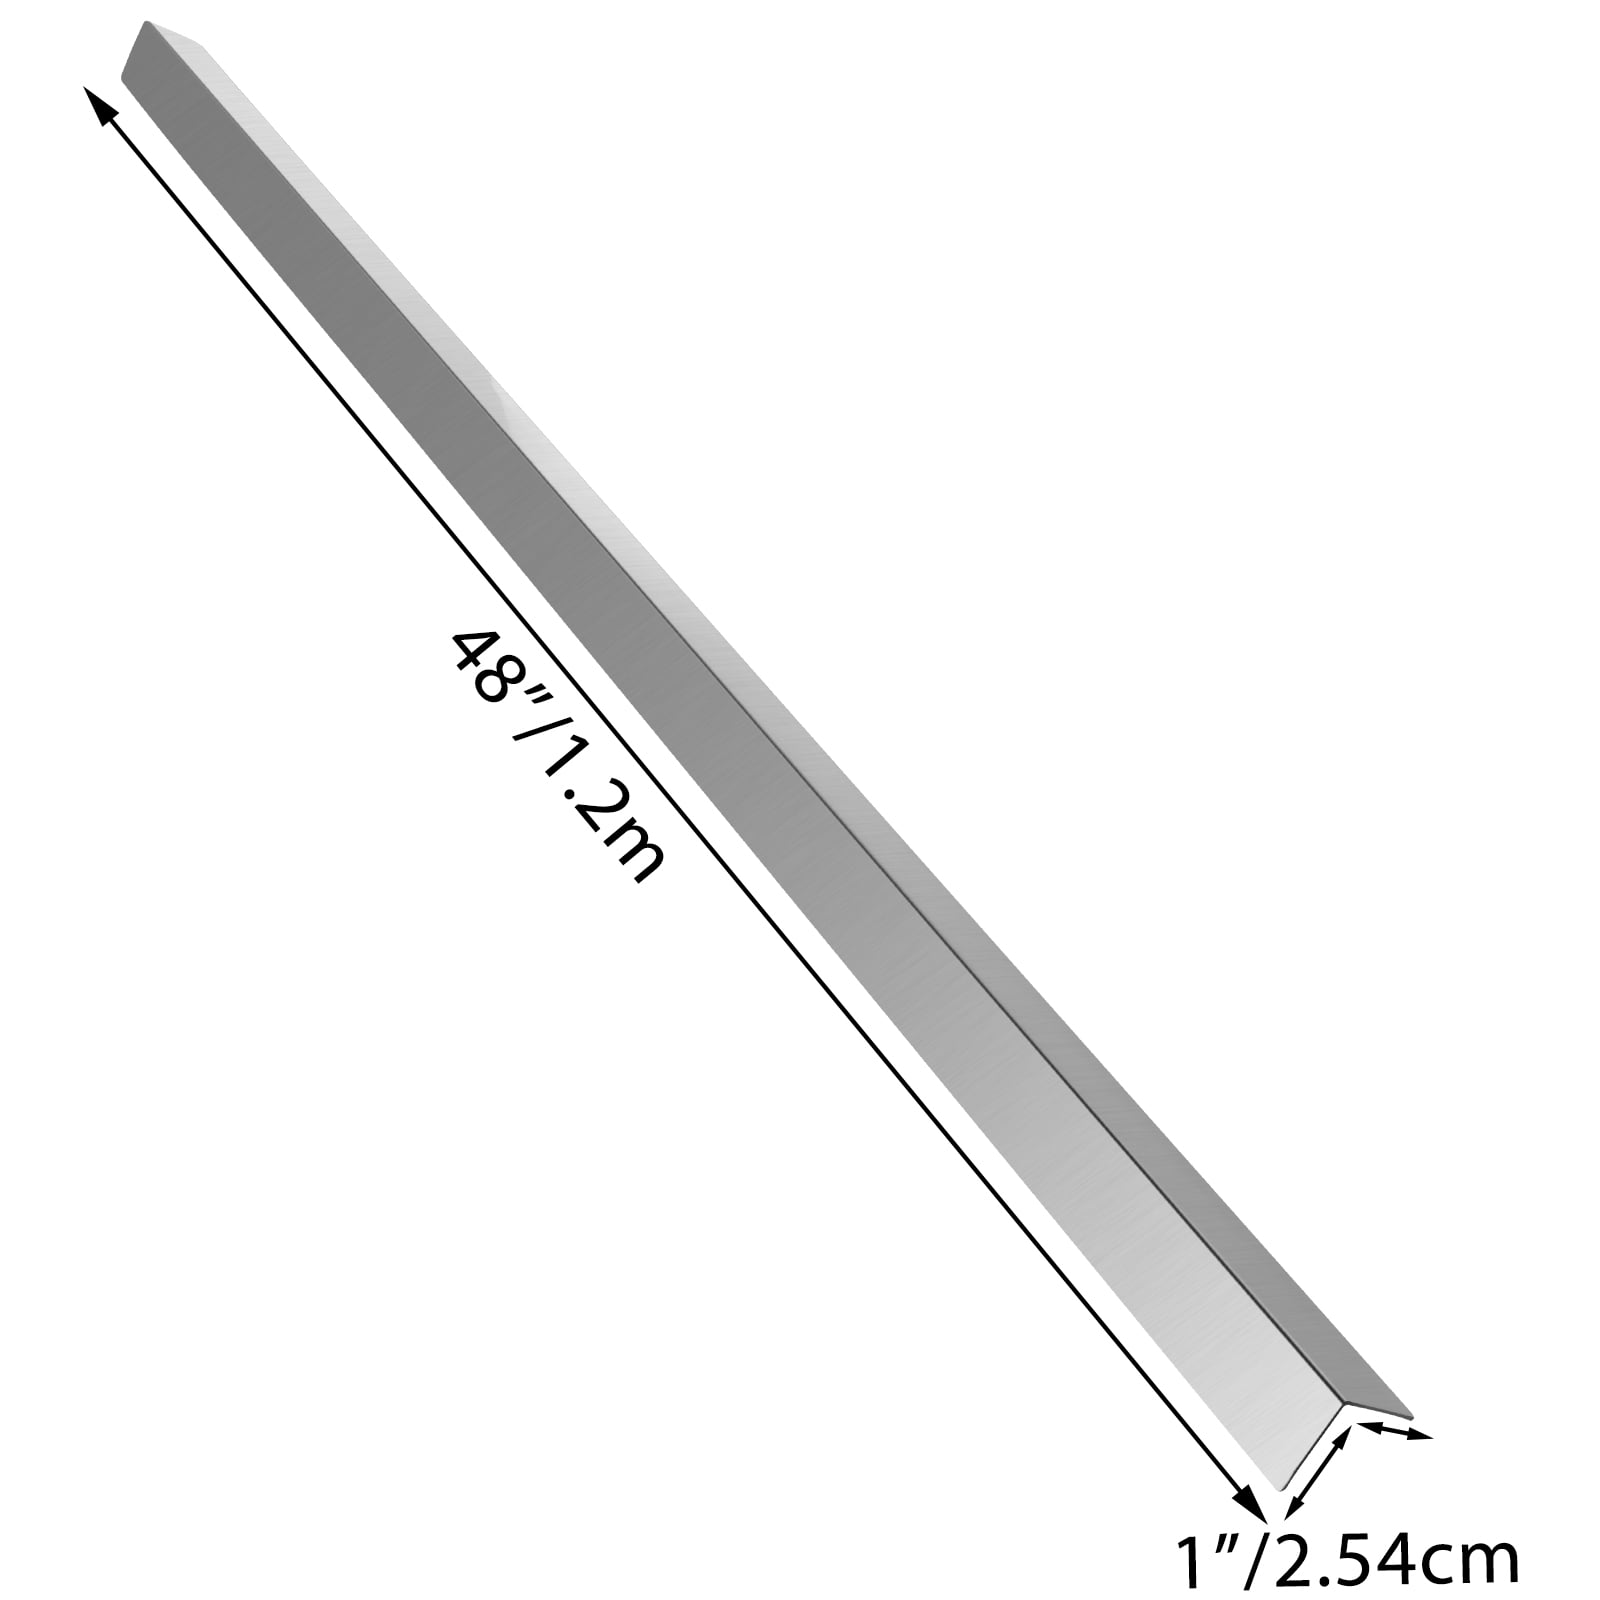 41 X 41 X 15 Mm Stainless Steel Table Corner Protector